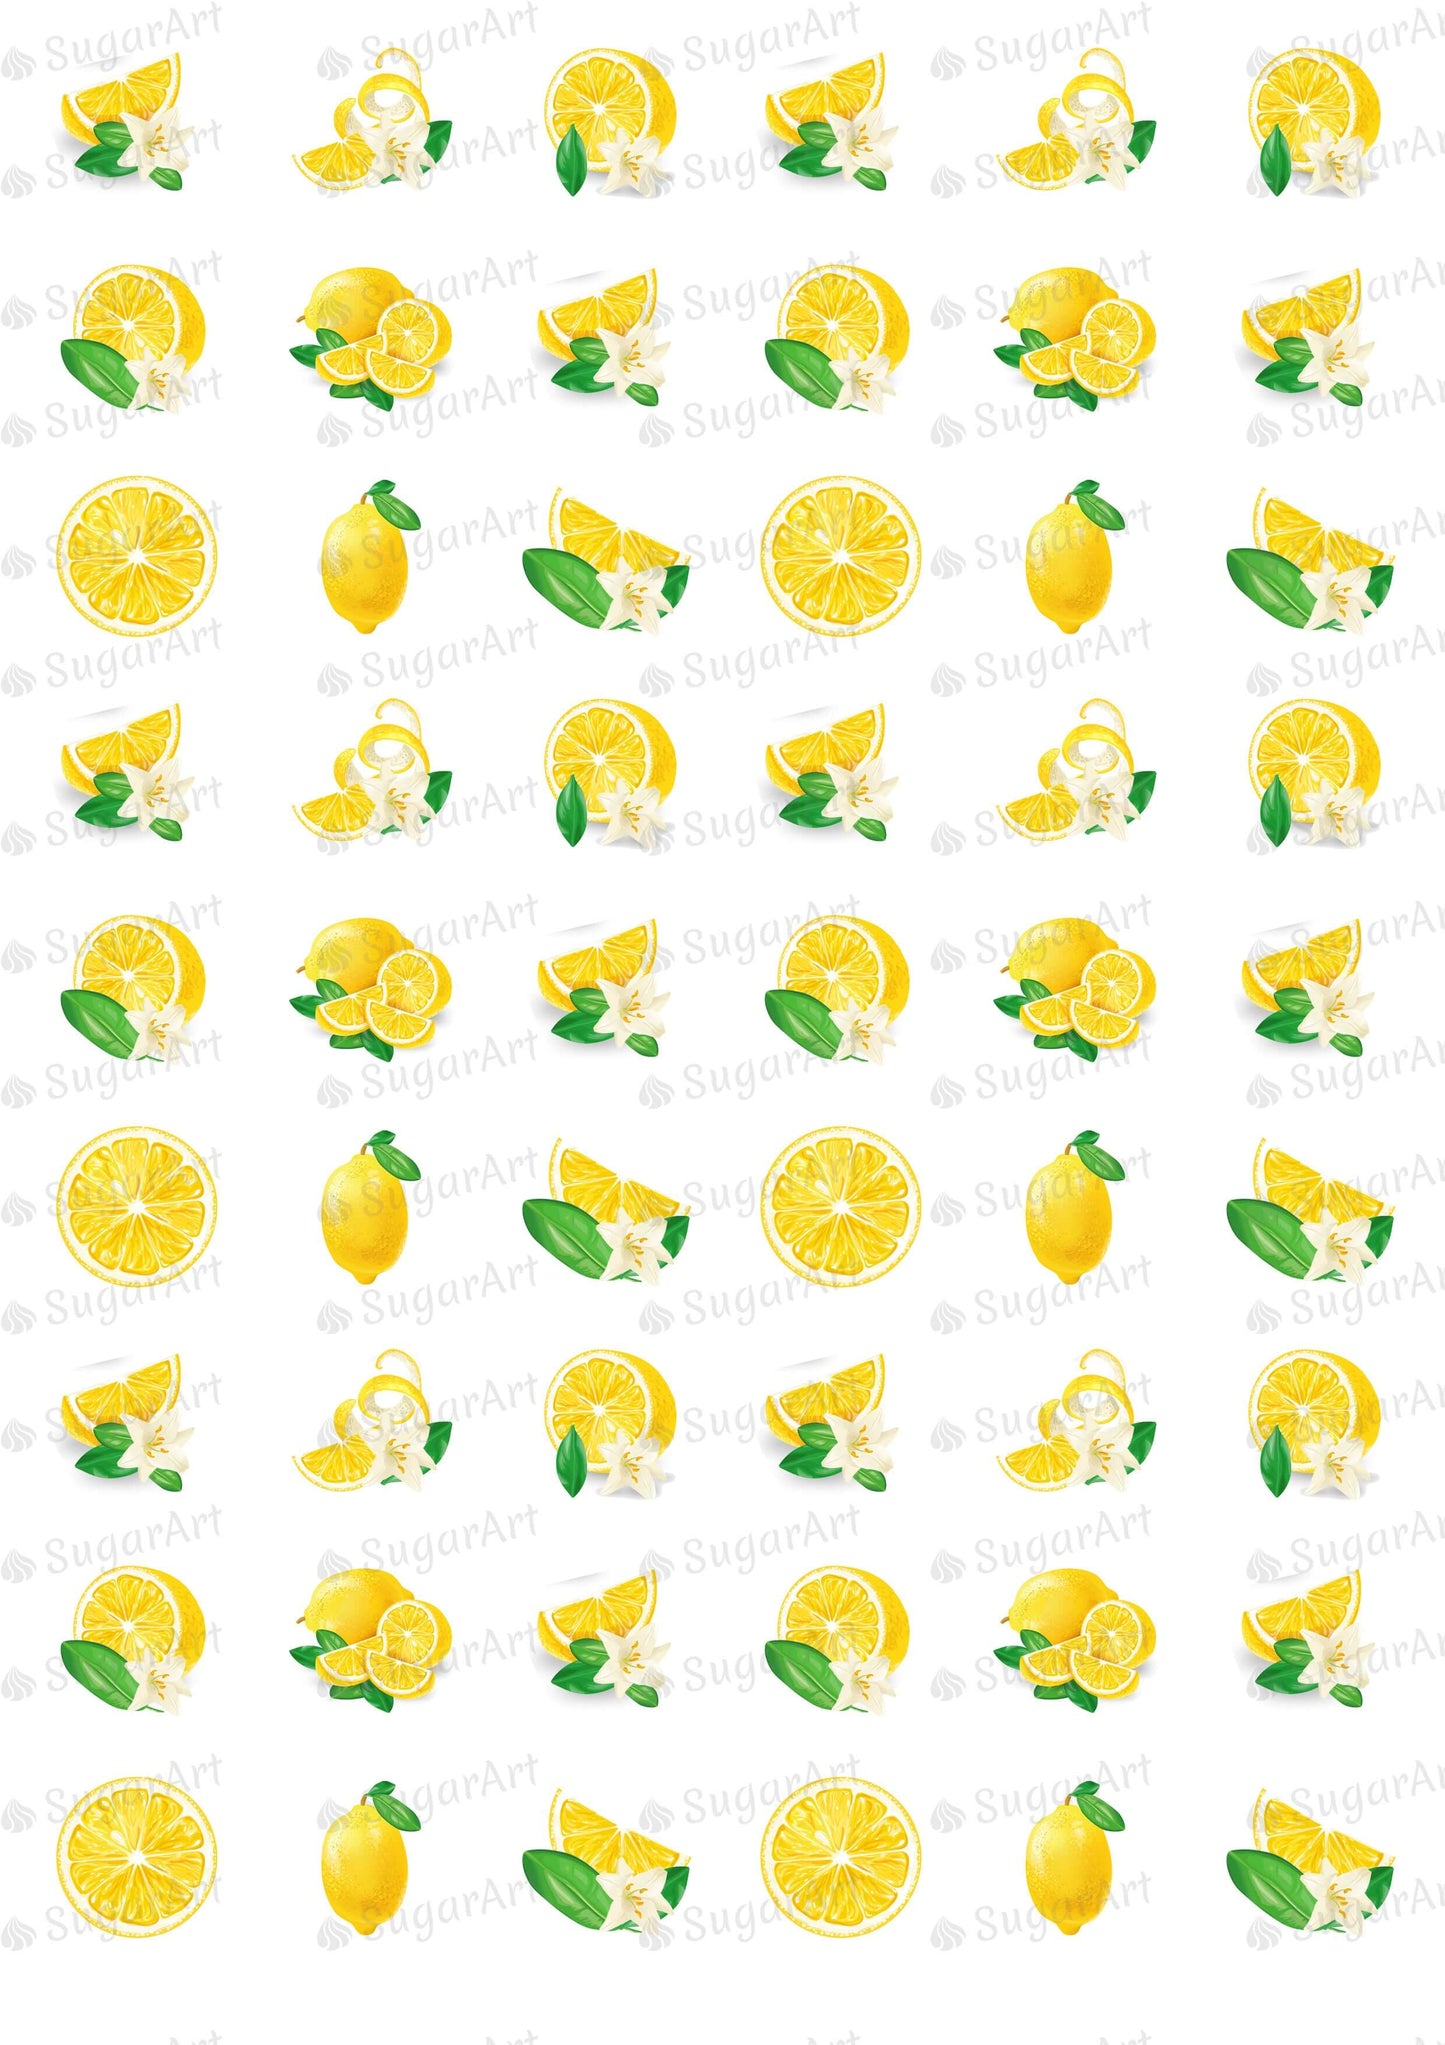 Lemons with Leaves and Flowers - ESA044.